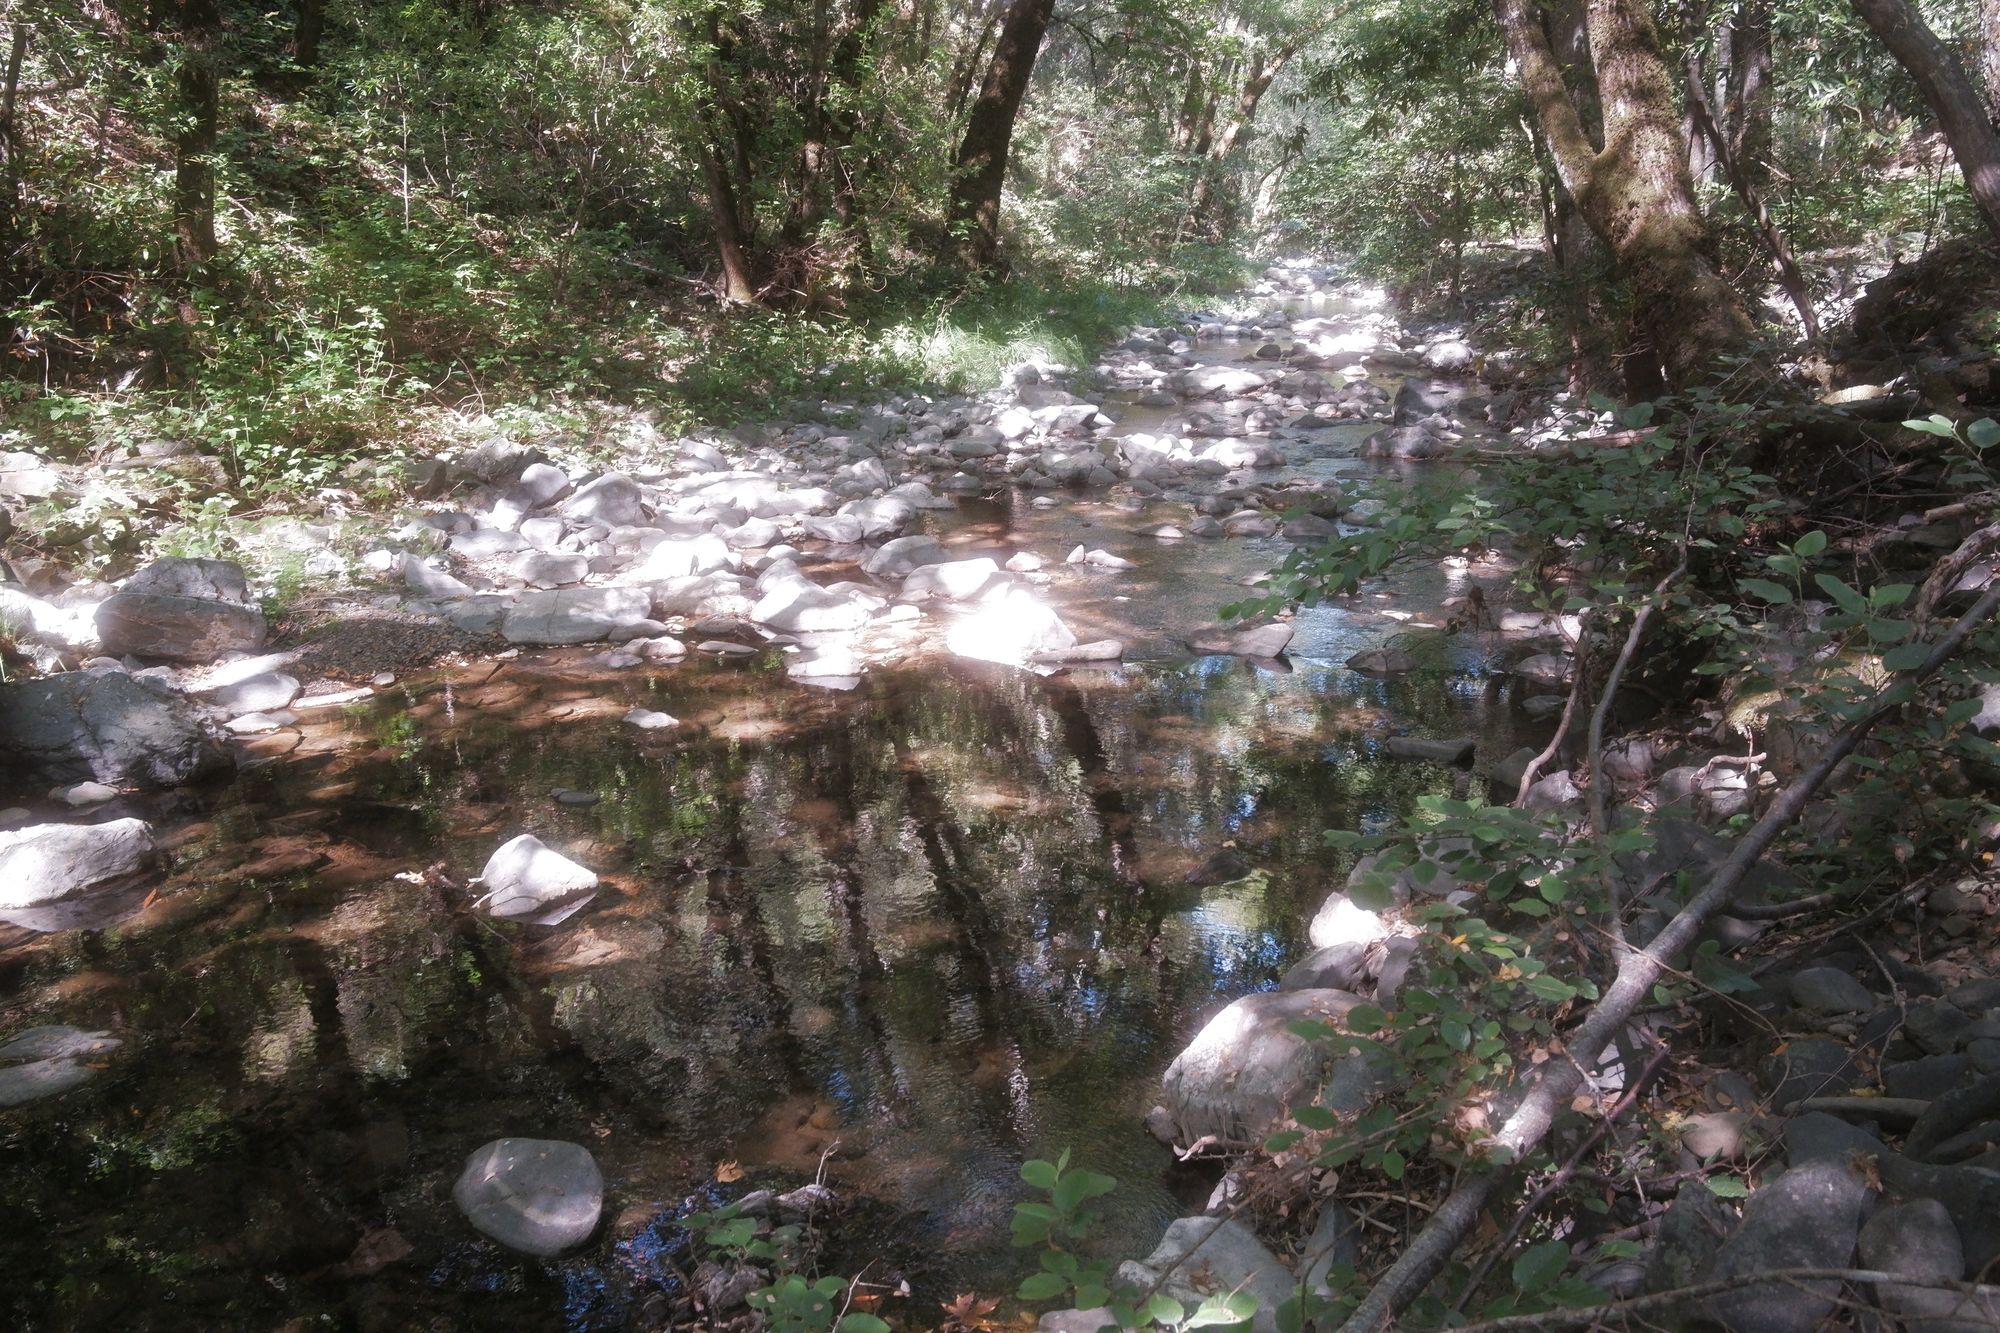 Discovering the Overlooked: Fishing a Hidden Creek in the SF Bay Area